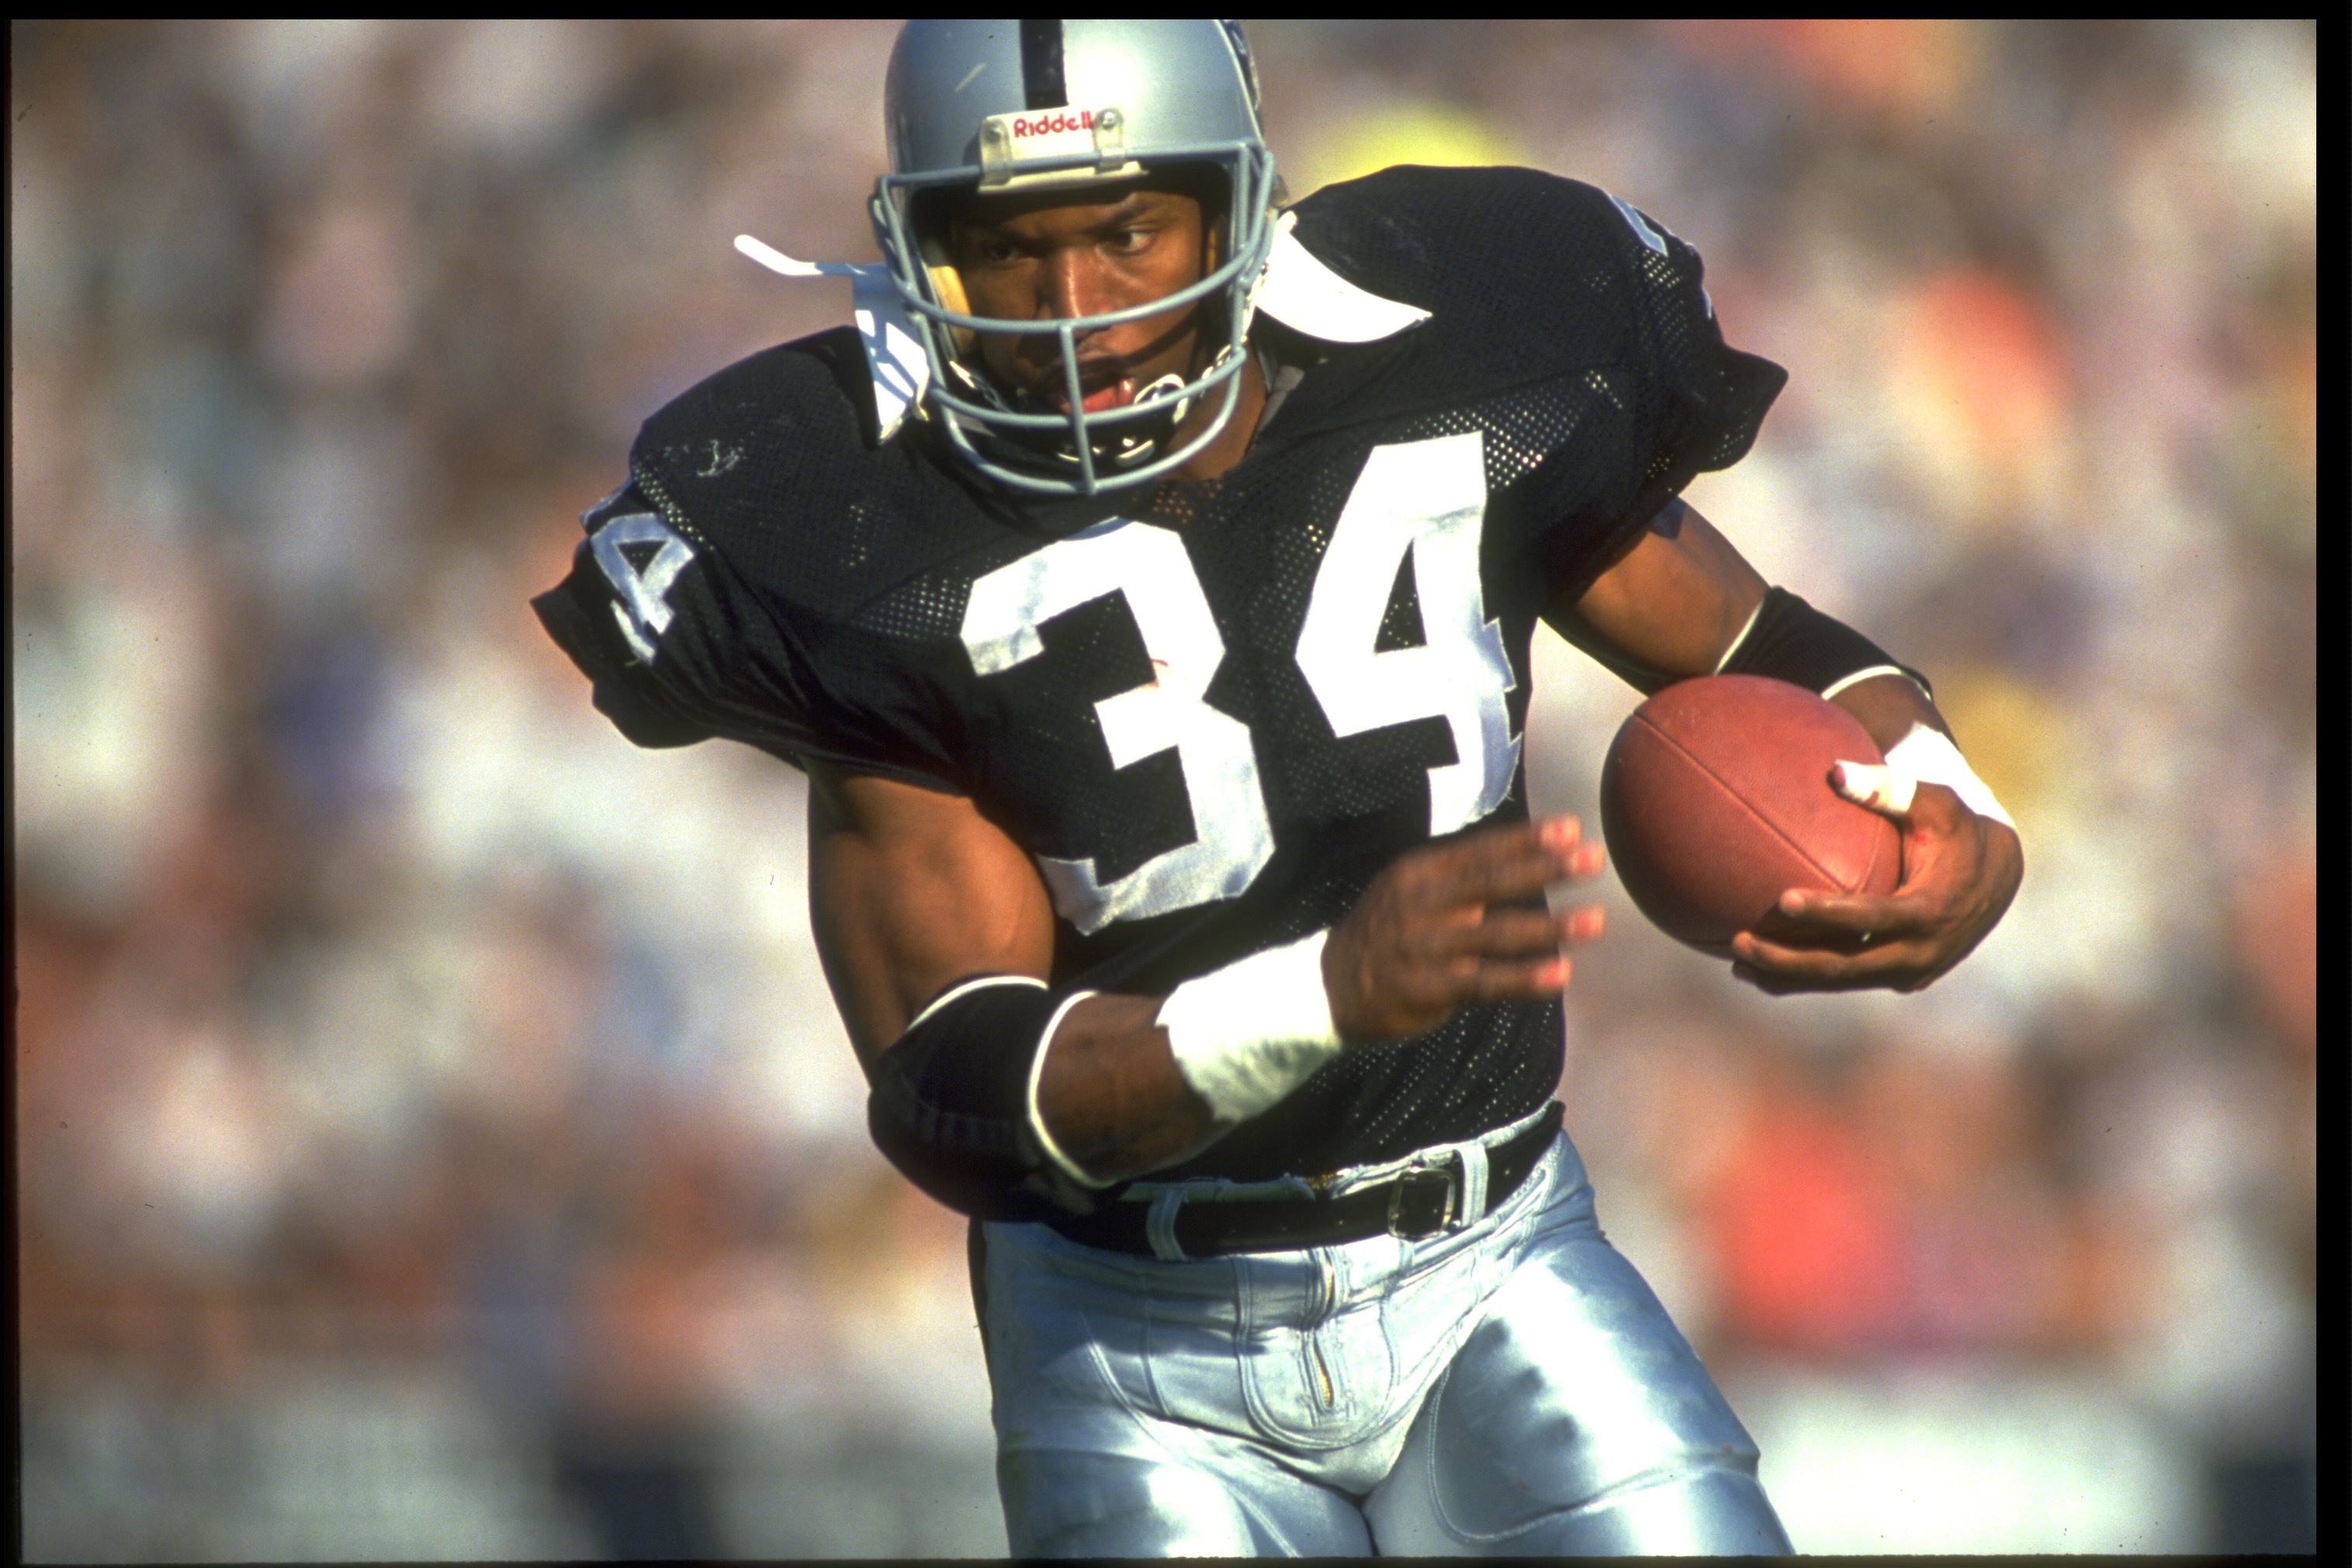 Top 10 NFL Running Backs of All Time Series: No. 8, Bo Jackson